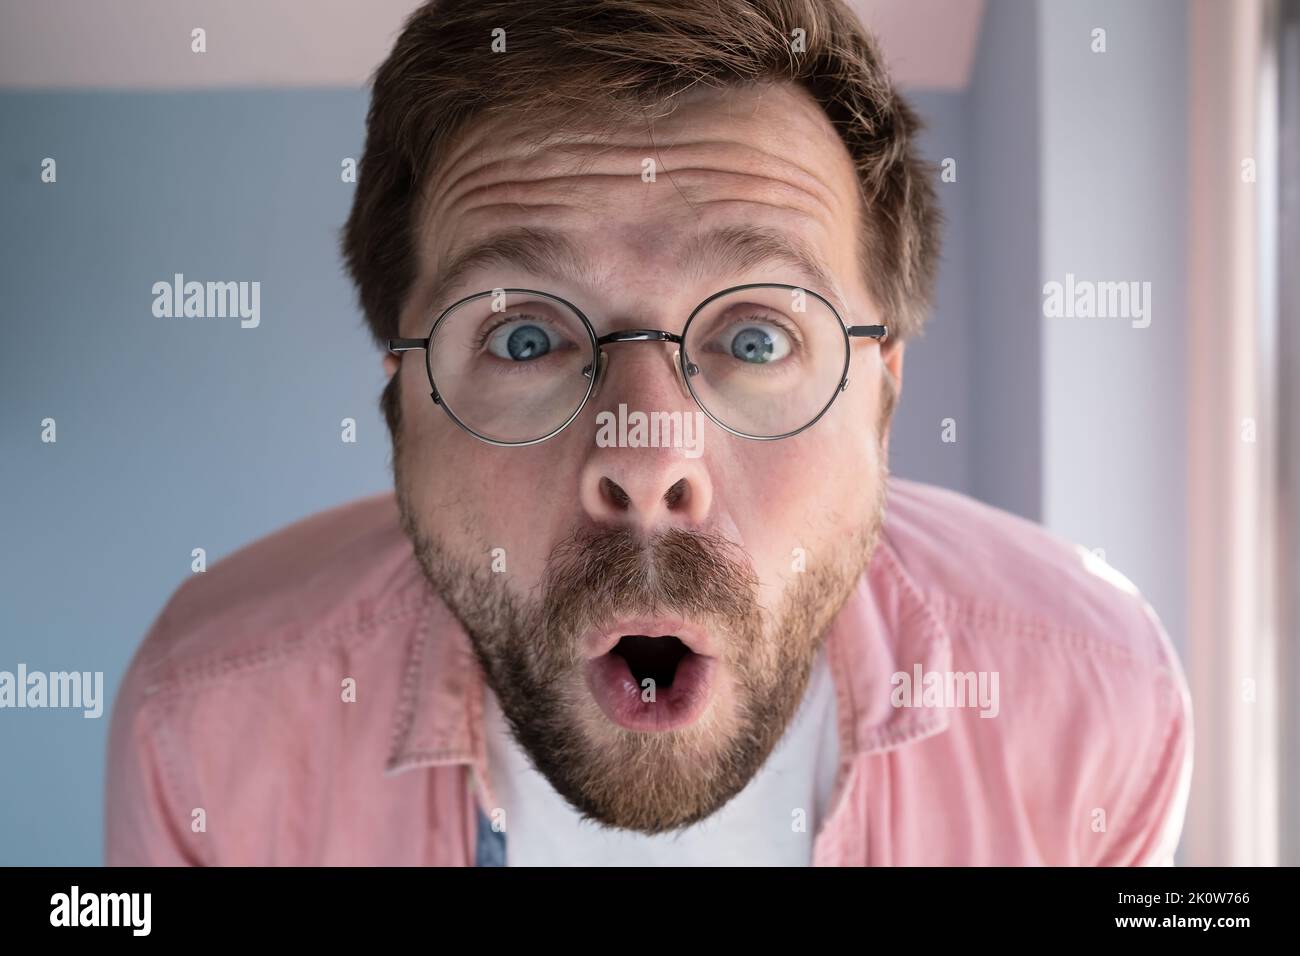 Close-up of an amazed man in glasses, with a funny expression on his face. Stock Photo